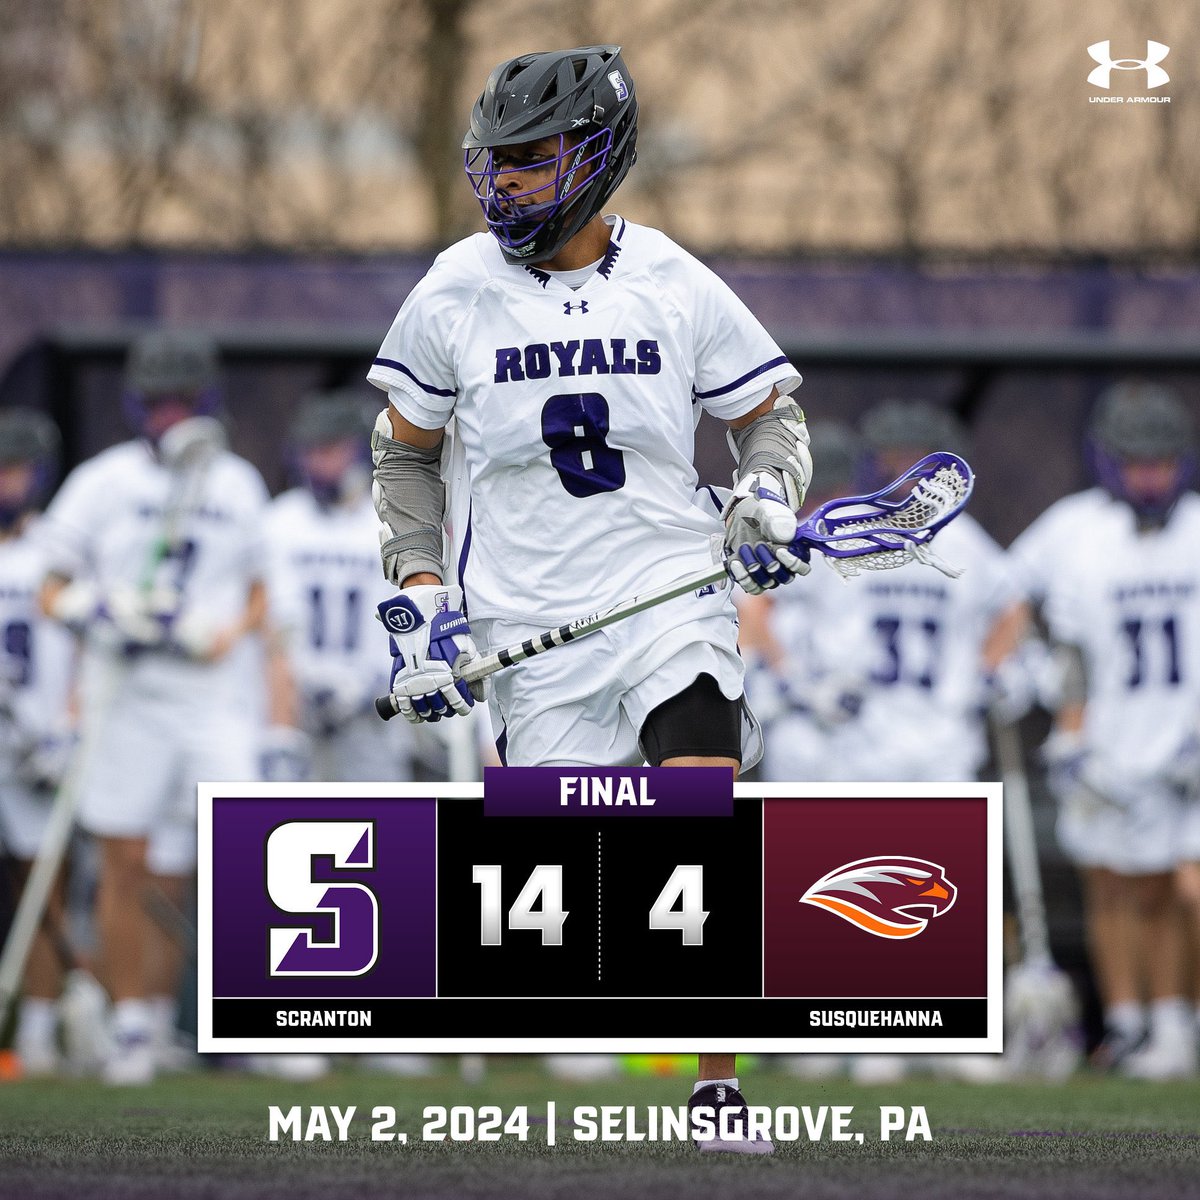 LANDMARK CHAMPIONSHIP BOUND! 😈

Kyle Holmes scored a career-high 7️⃣ goals to lead @ScrantonMensLax to a 14-4 win over Susquehanna in the @LandmarkConf semifinals this afternoon! 🥍

#GoRoyals